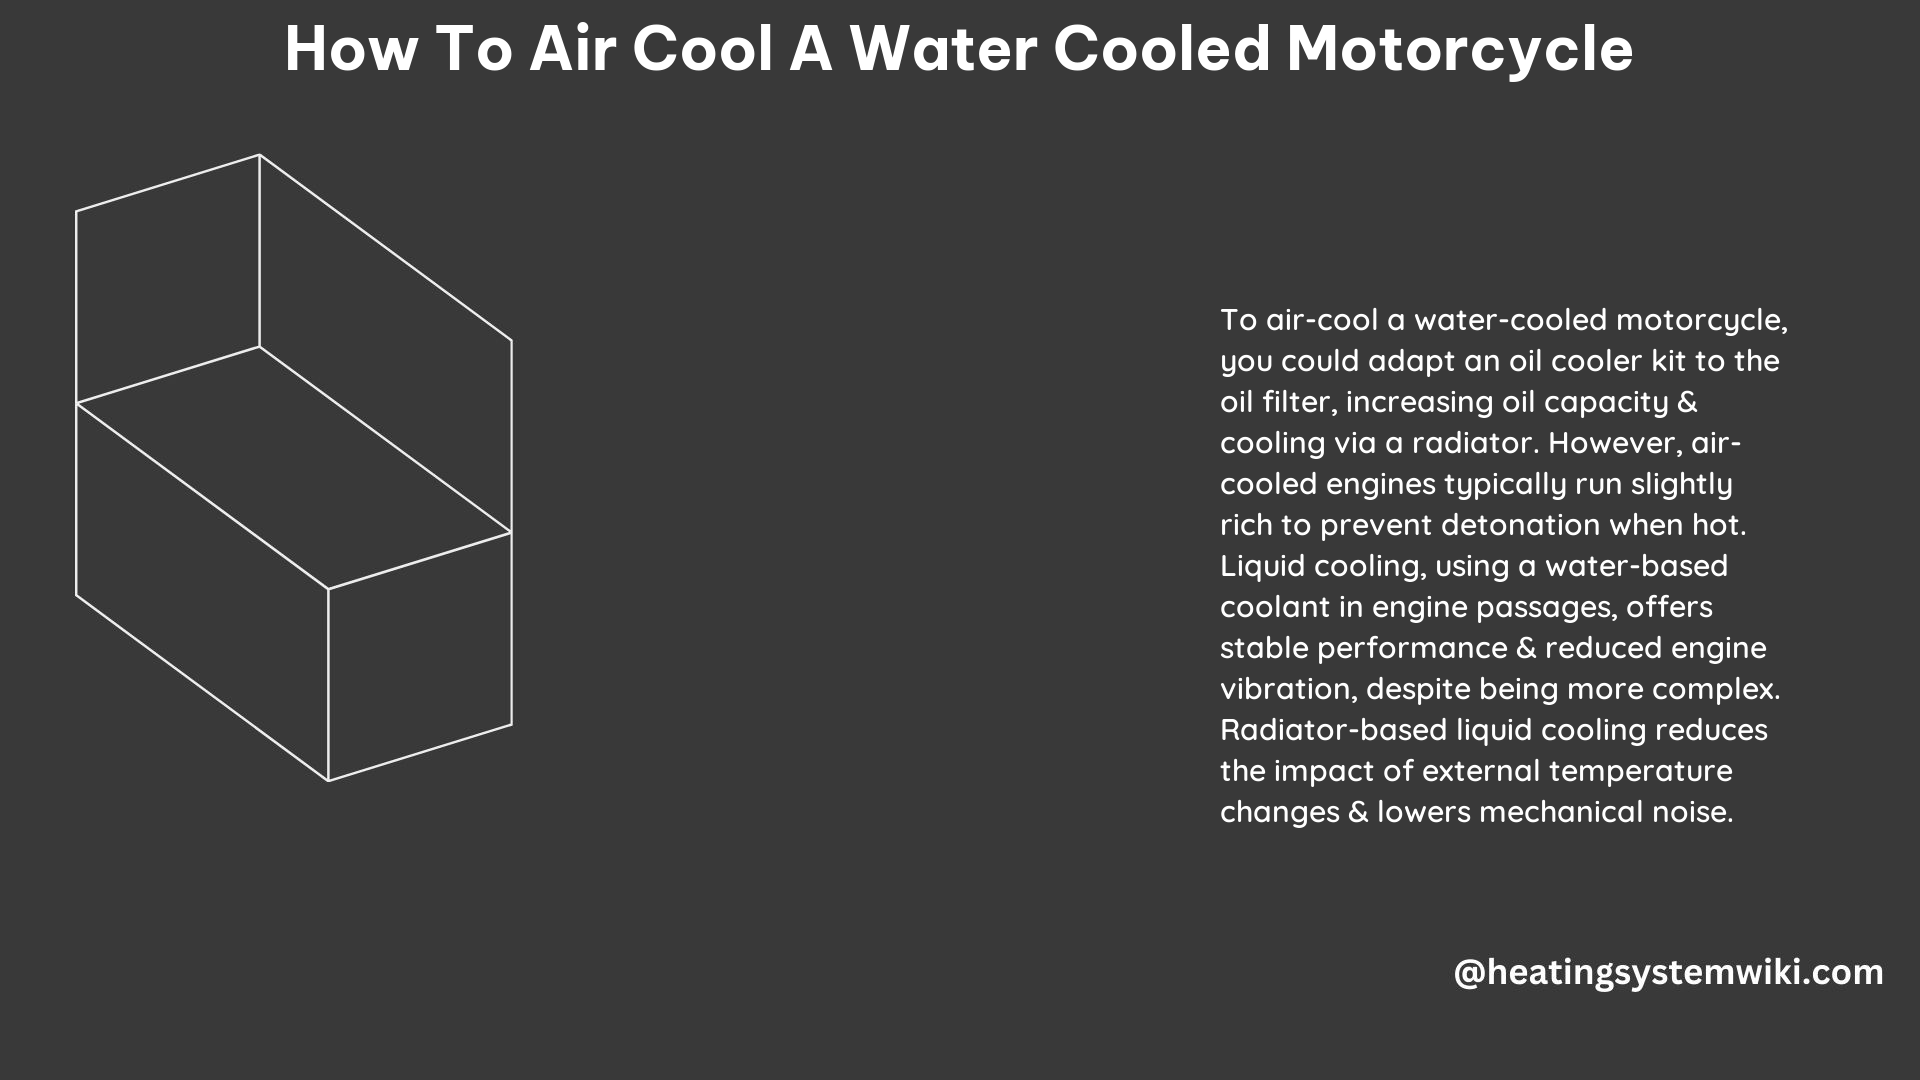 How to Air Cool a Water Cooled Motorcycle